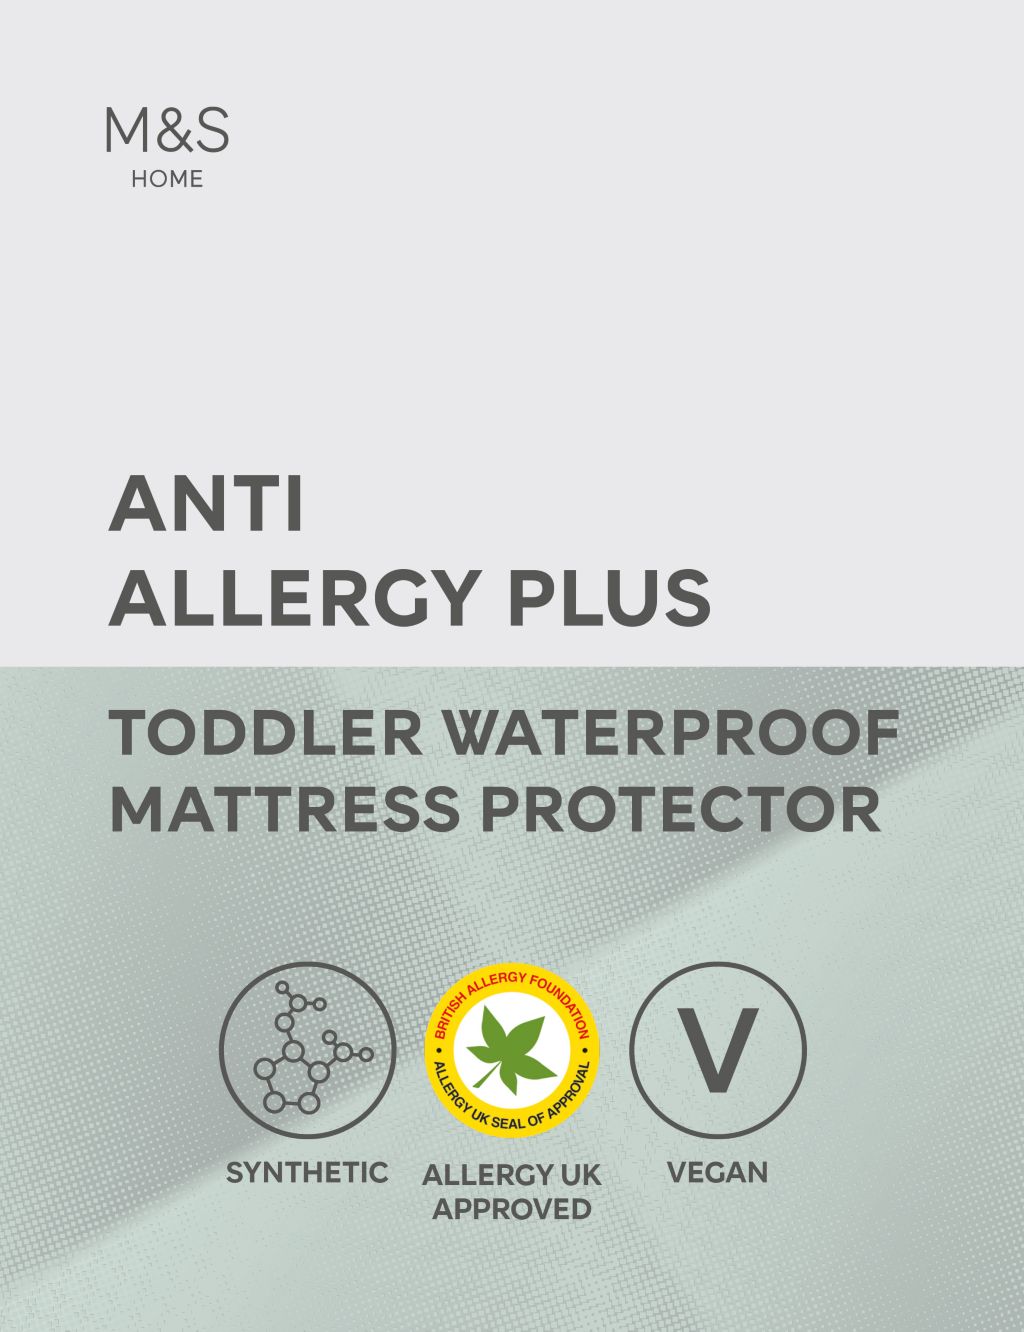 Anti Allergy Cot Bed Mattress Protector image 1